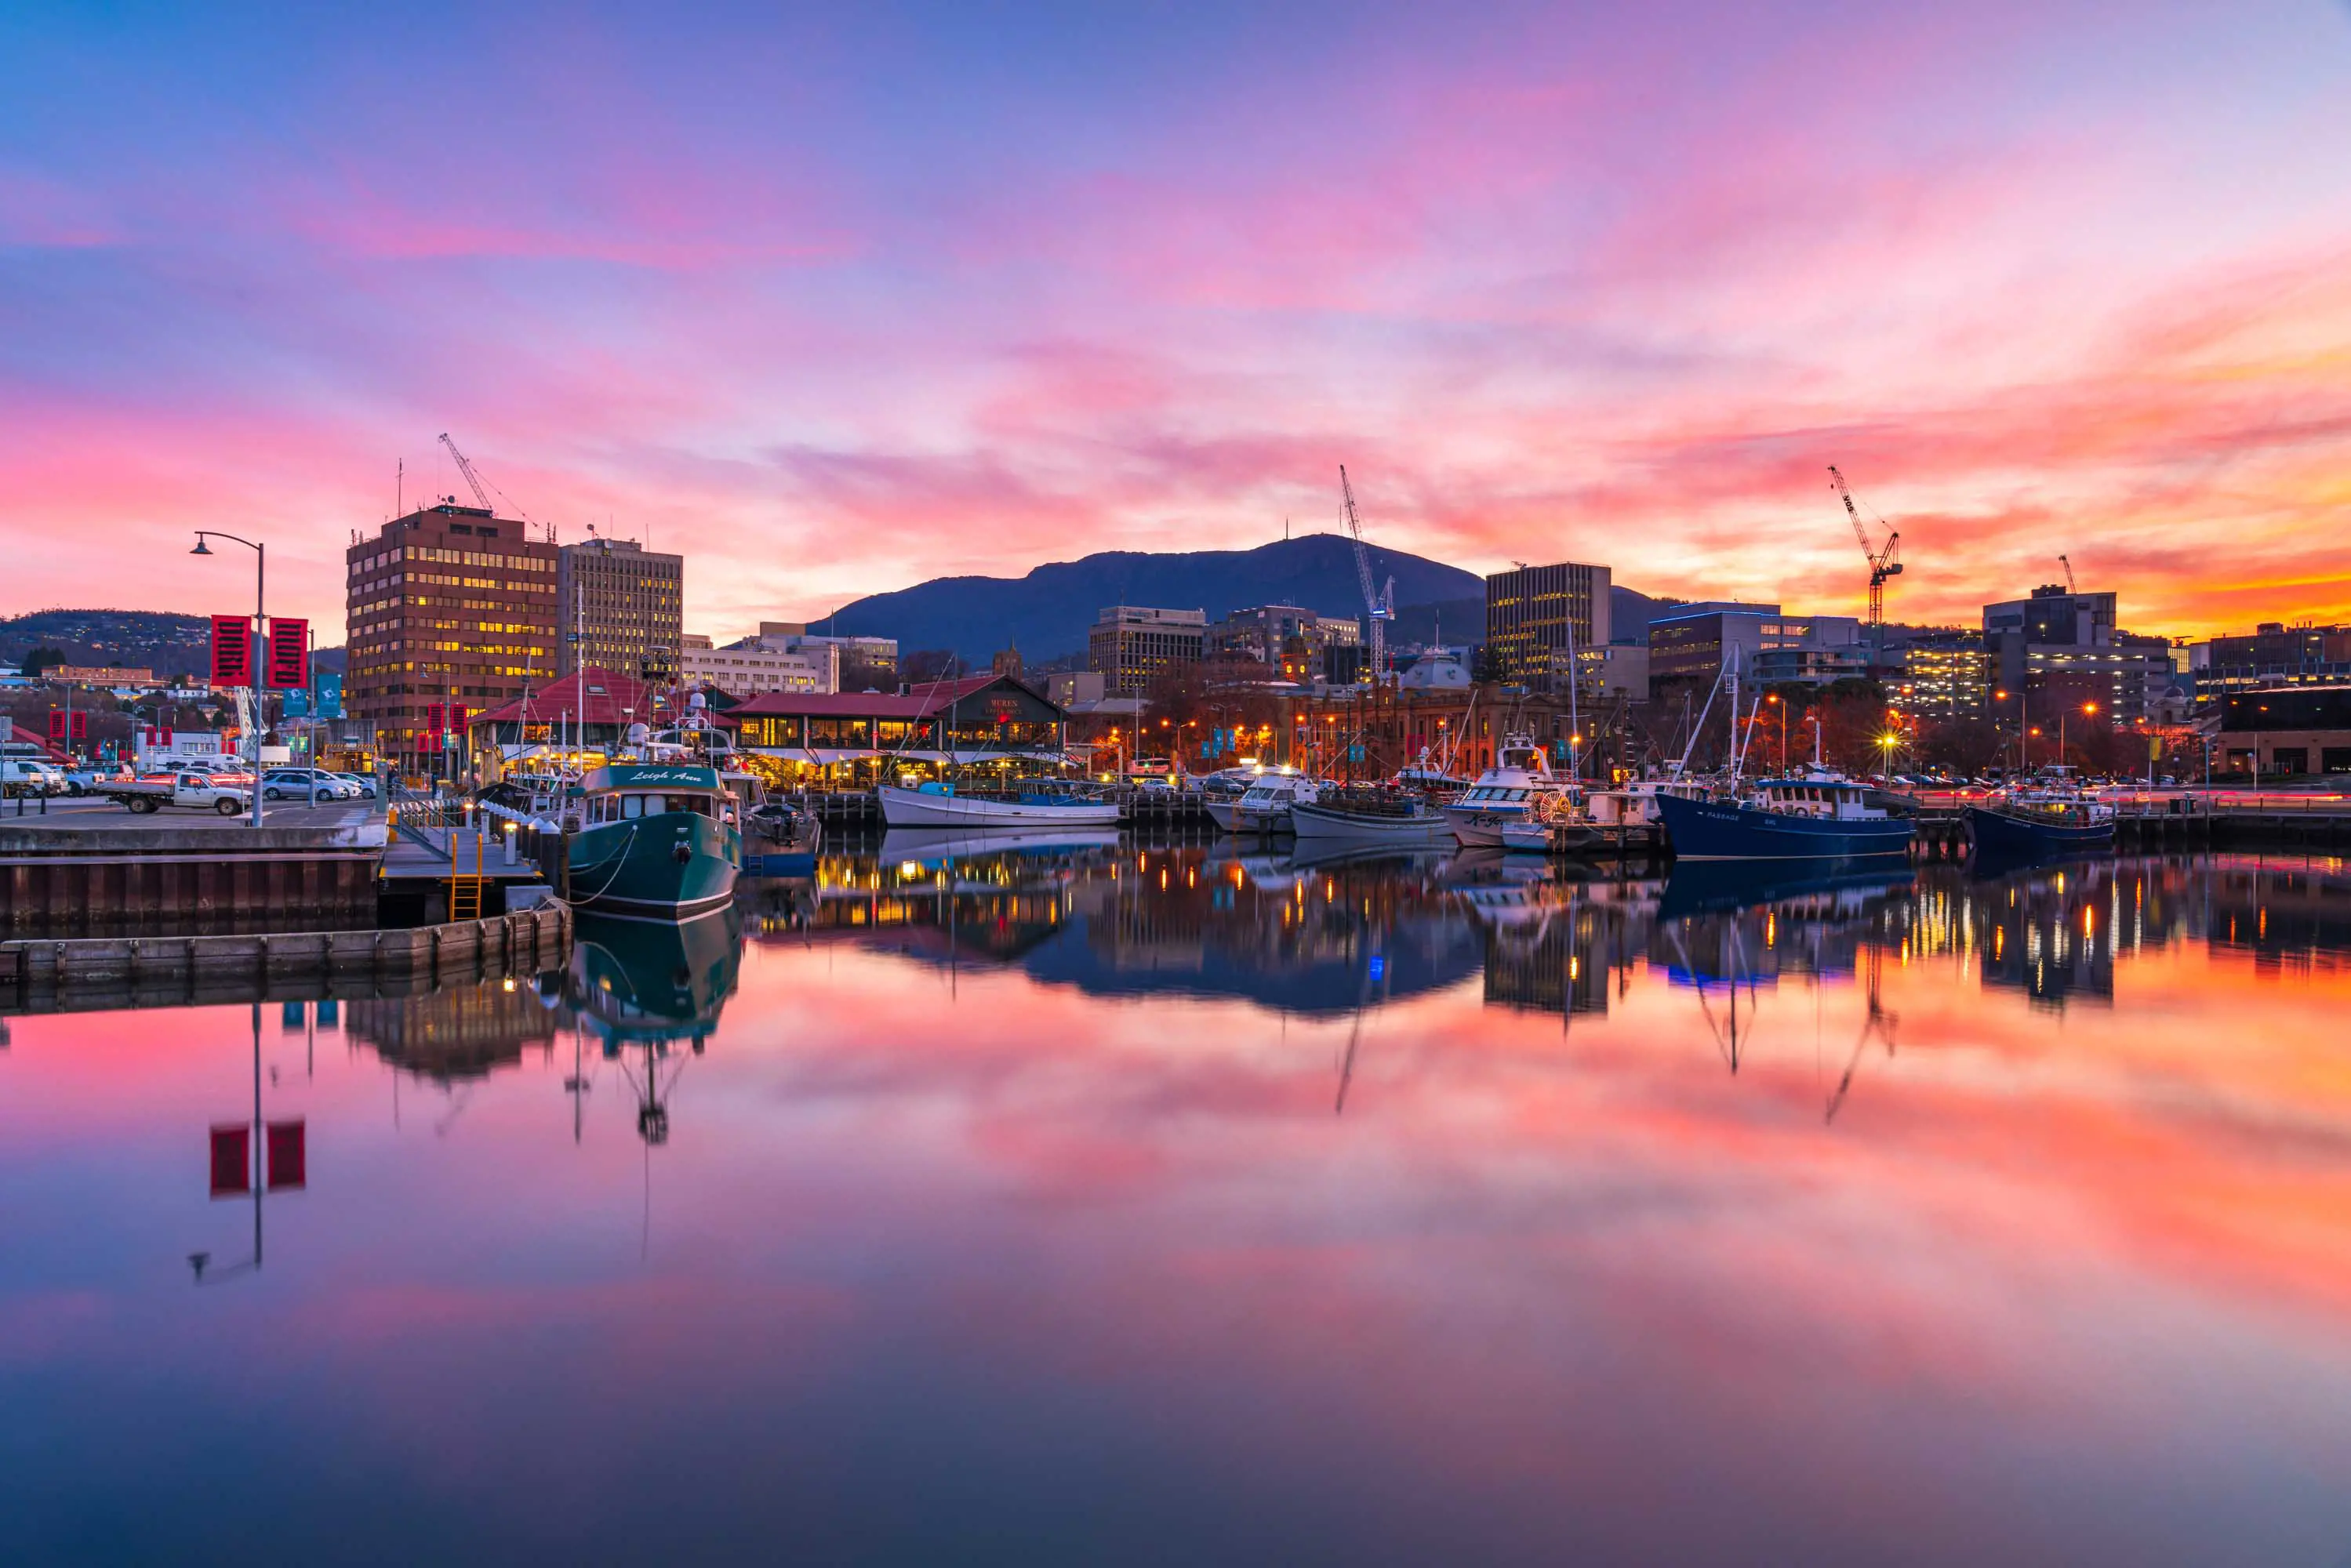 A pink sunset over the city lights of Hobart reflected in water at the waterfront.